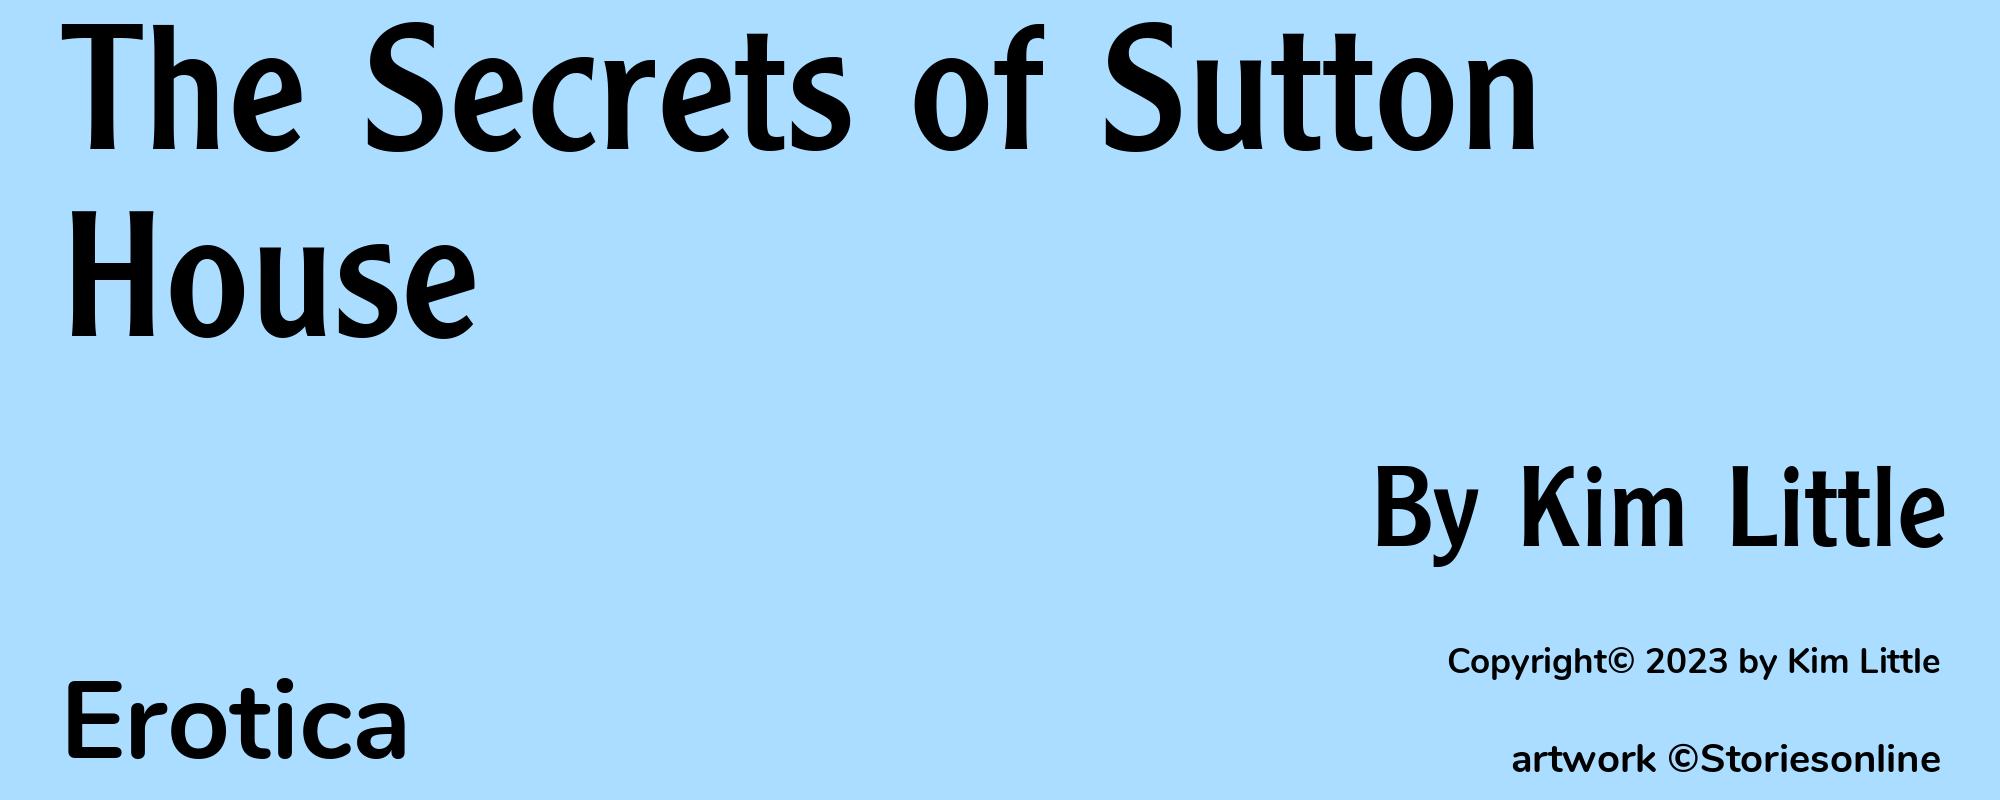 The Secrets of Sutton House - Cover